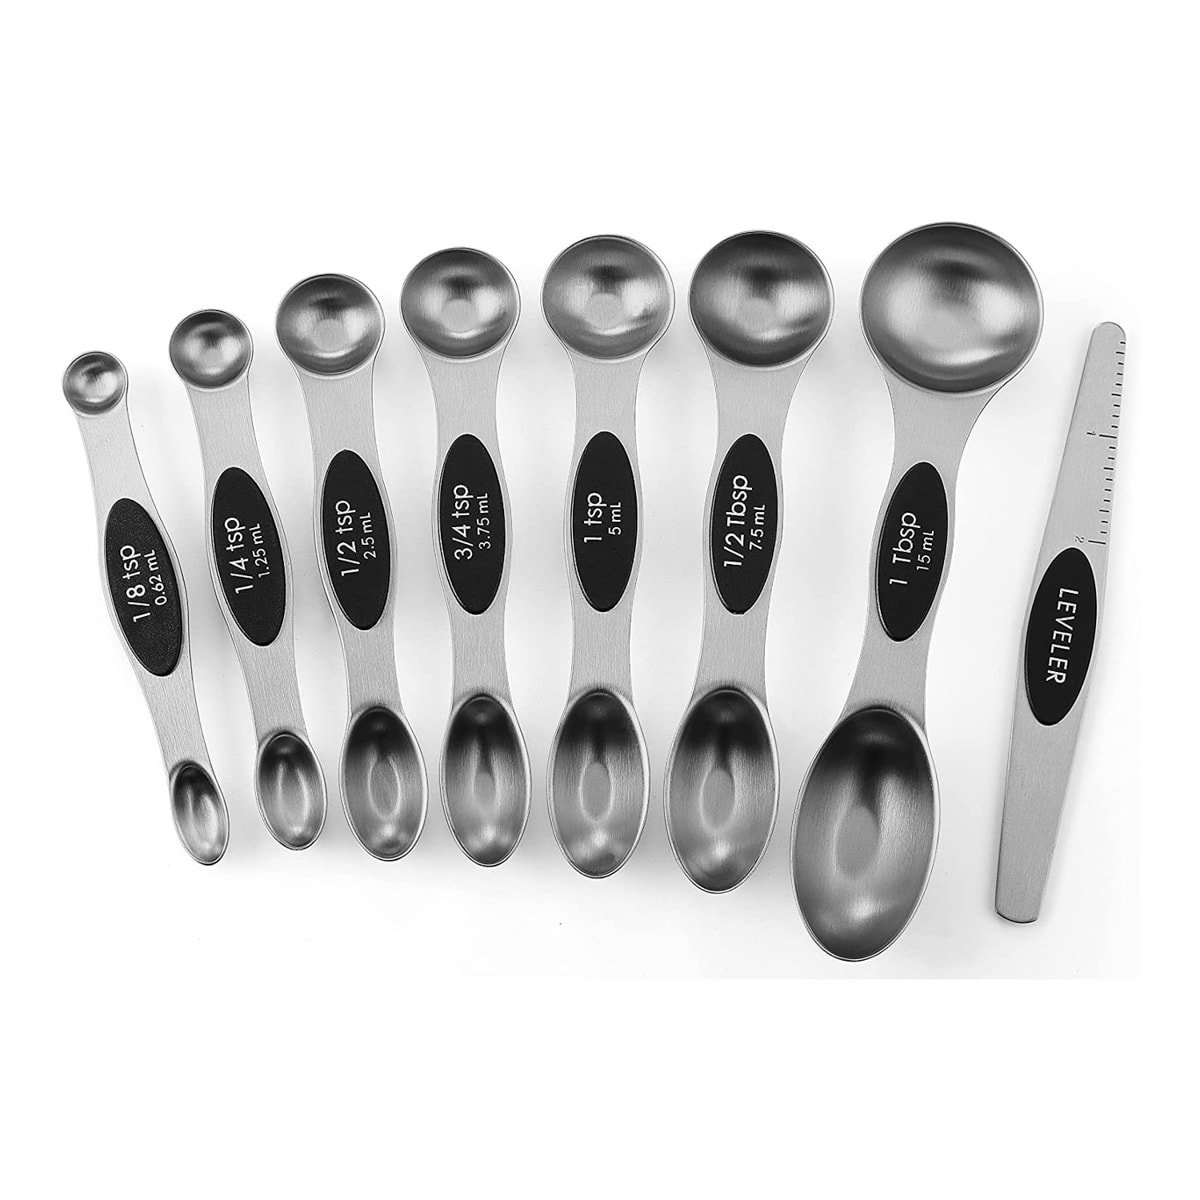 A set of magnetic measuring spoons.